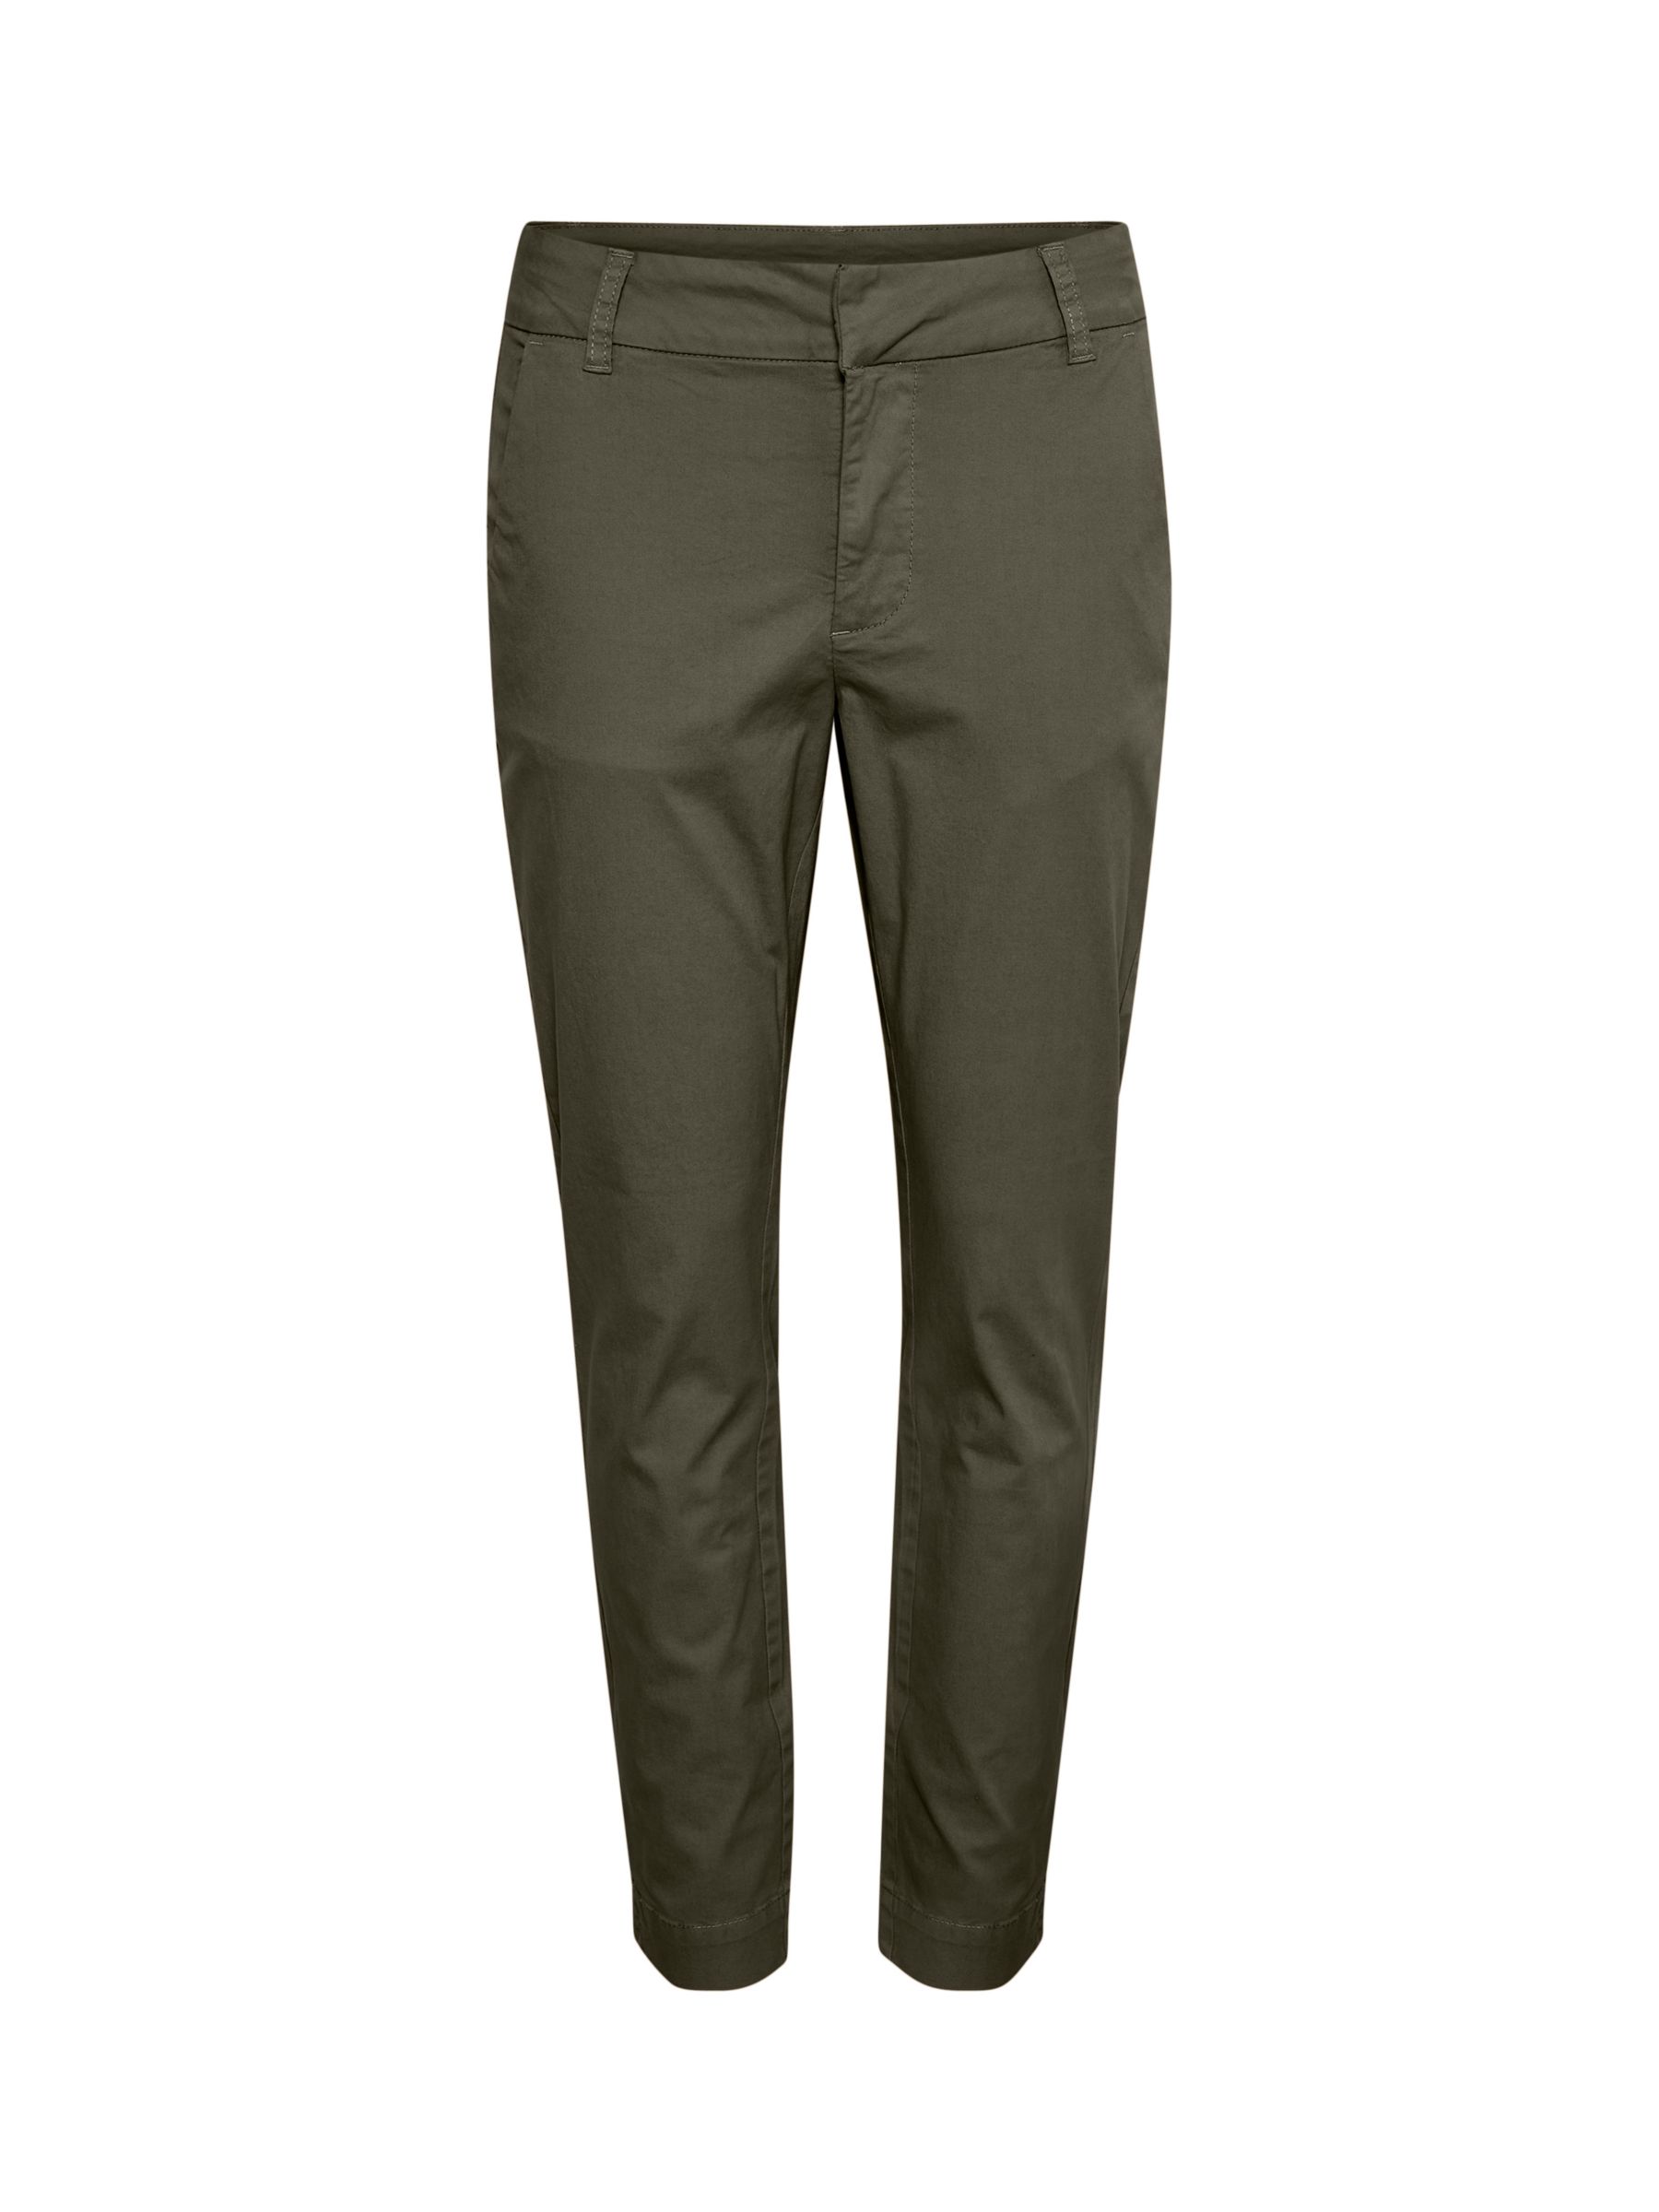 KAFFE Mette Cropped Trousers, Grape Leaf at John Lewis & Partners